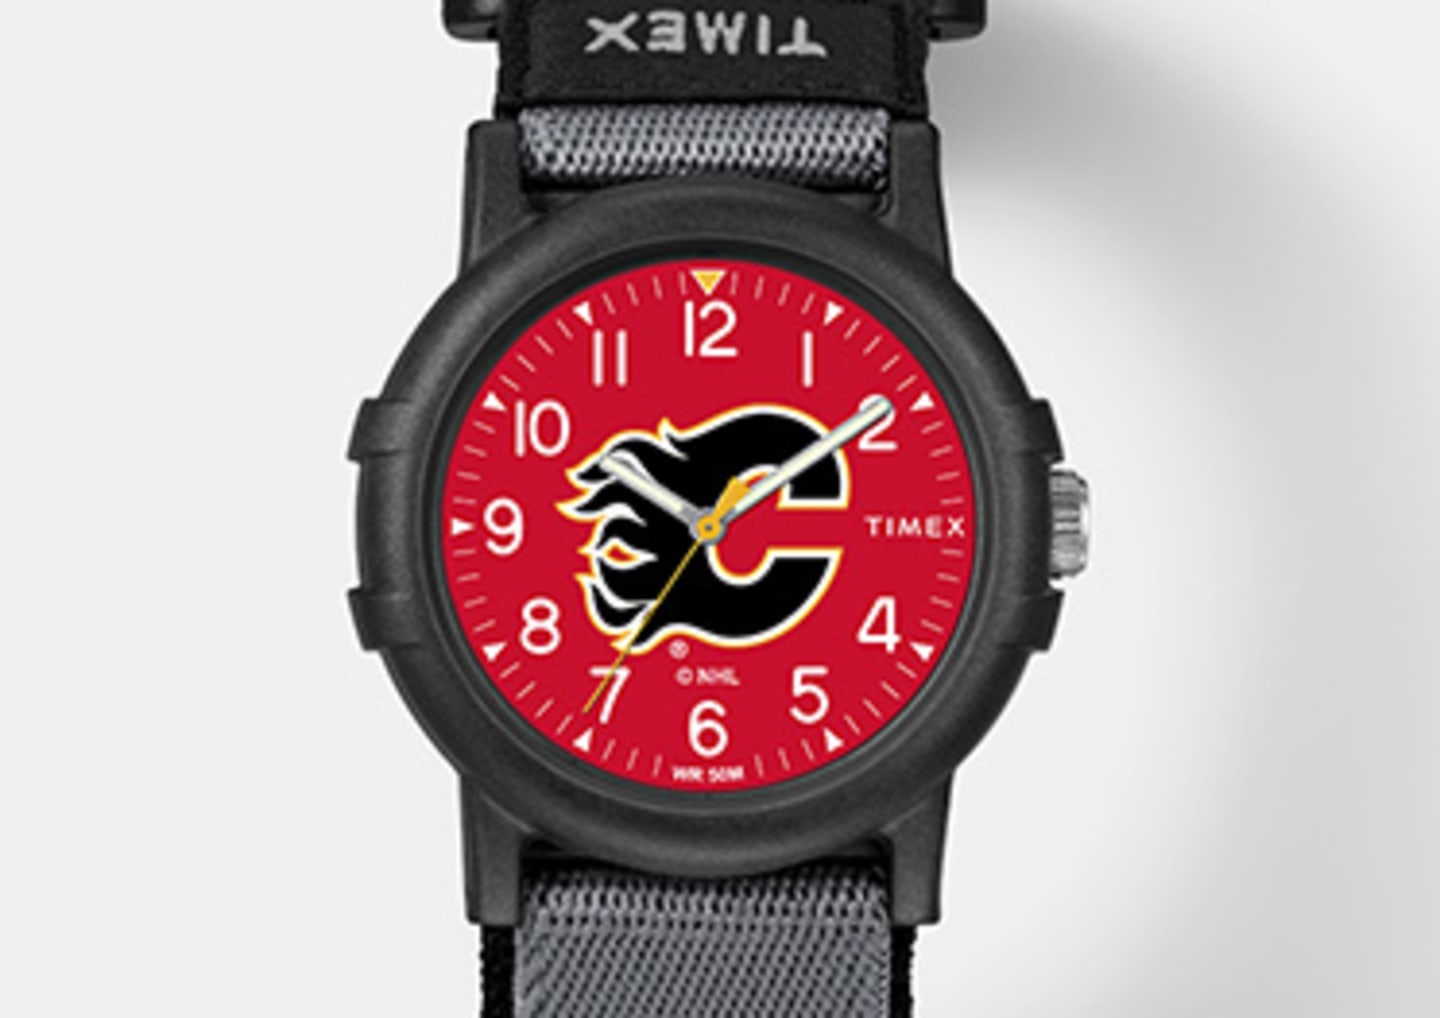 Black Calgary Flames watch with logo in the center emphasizing kid's watches